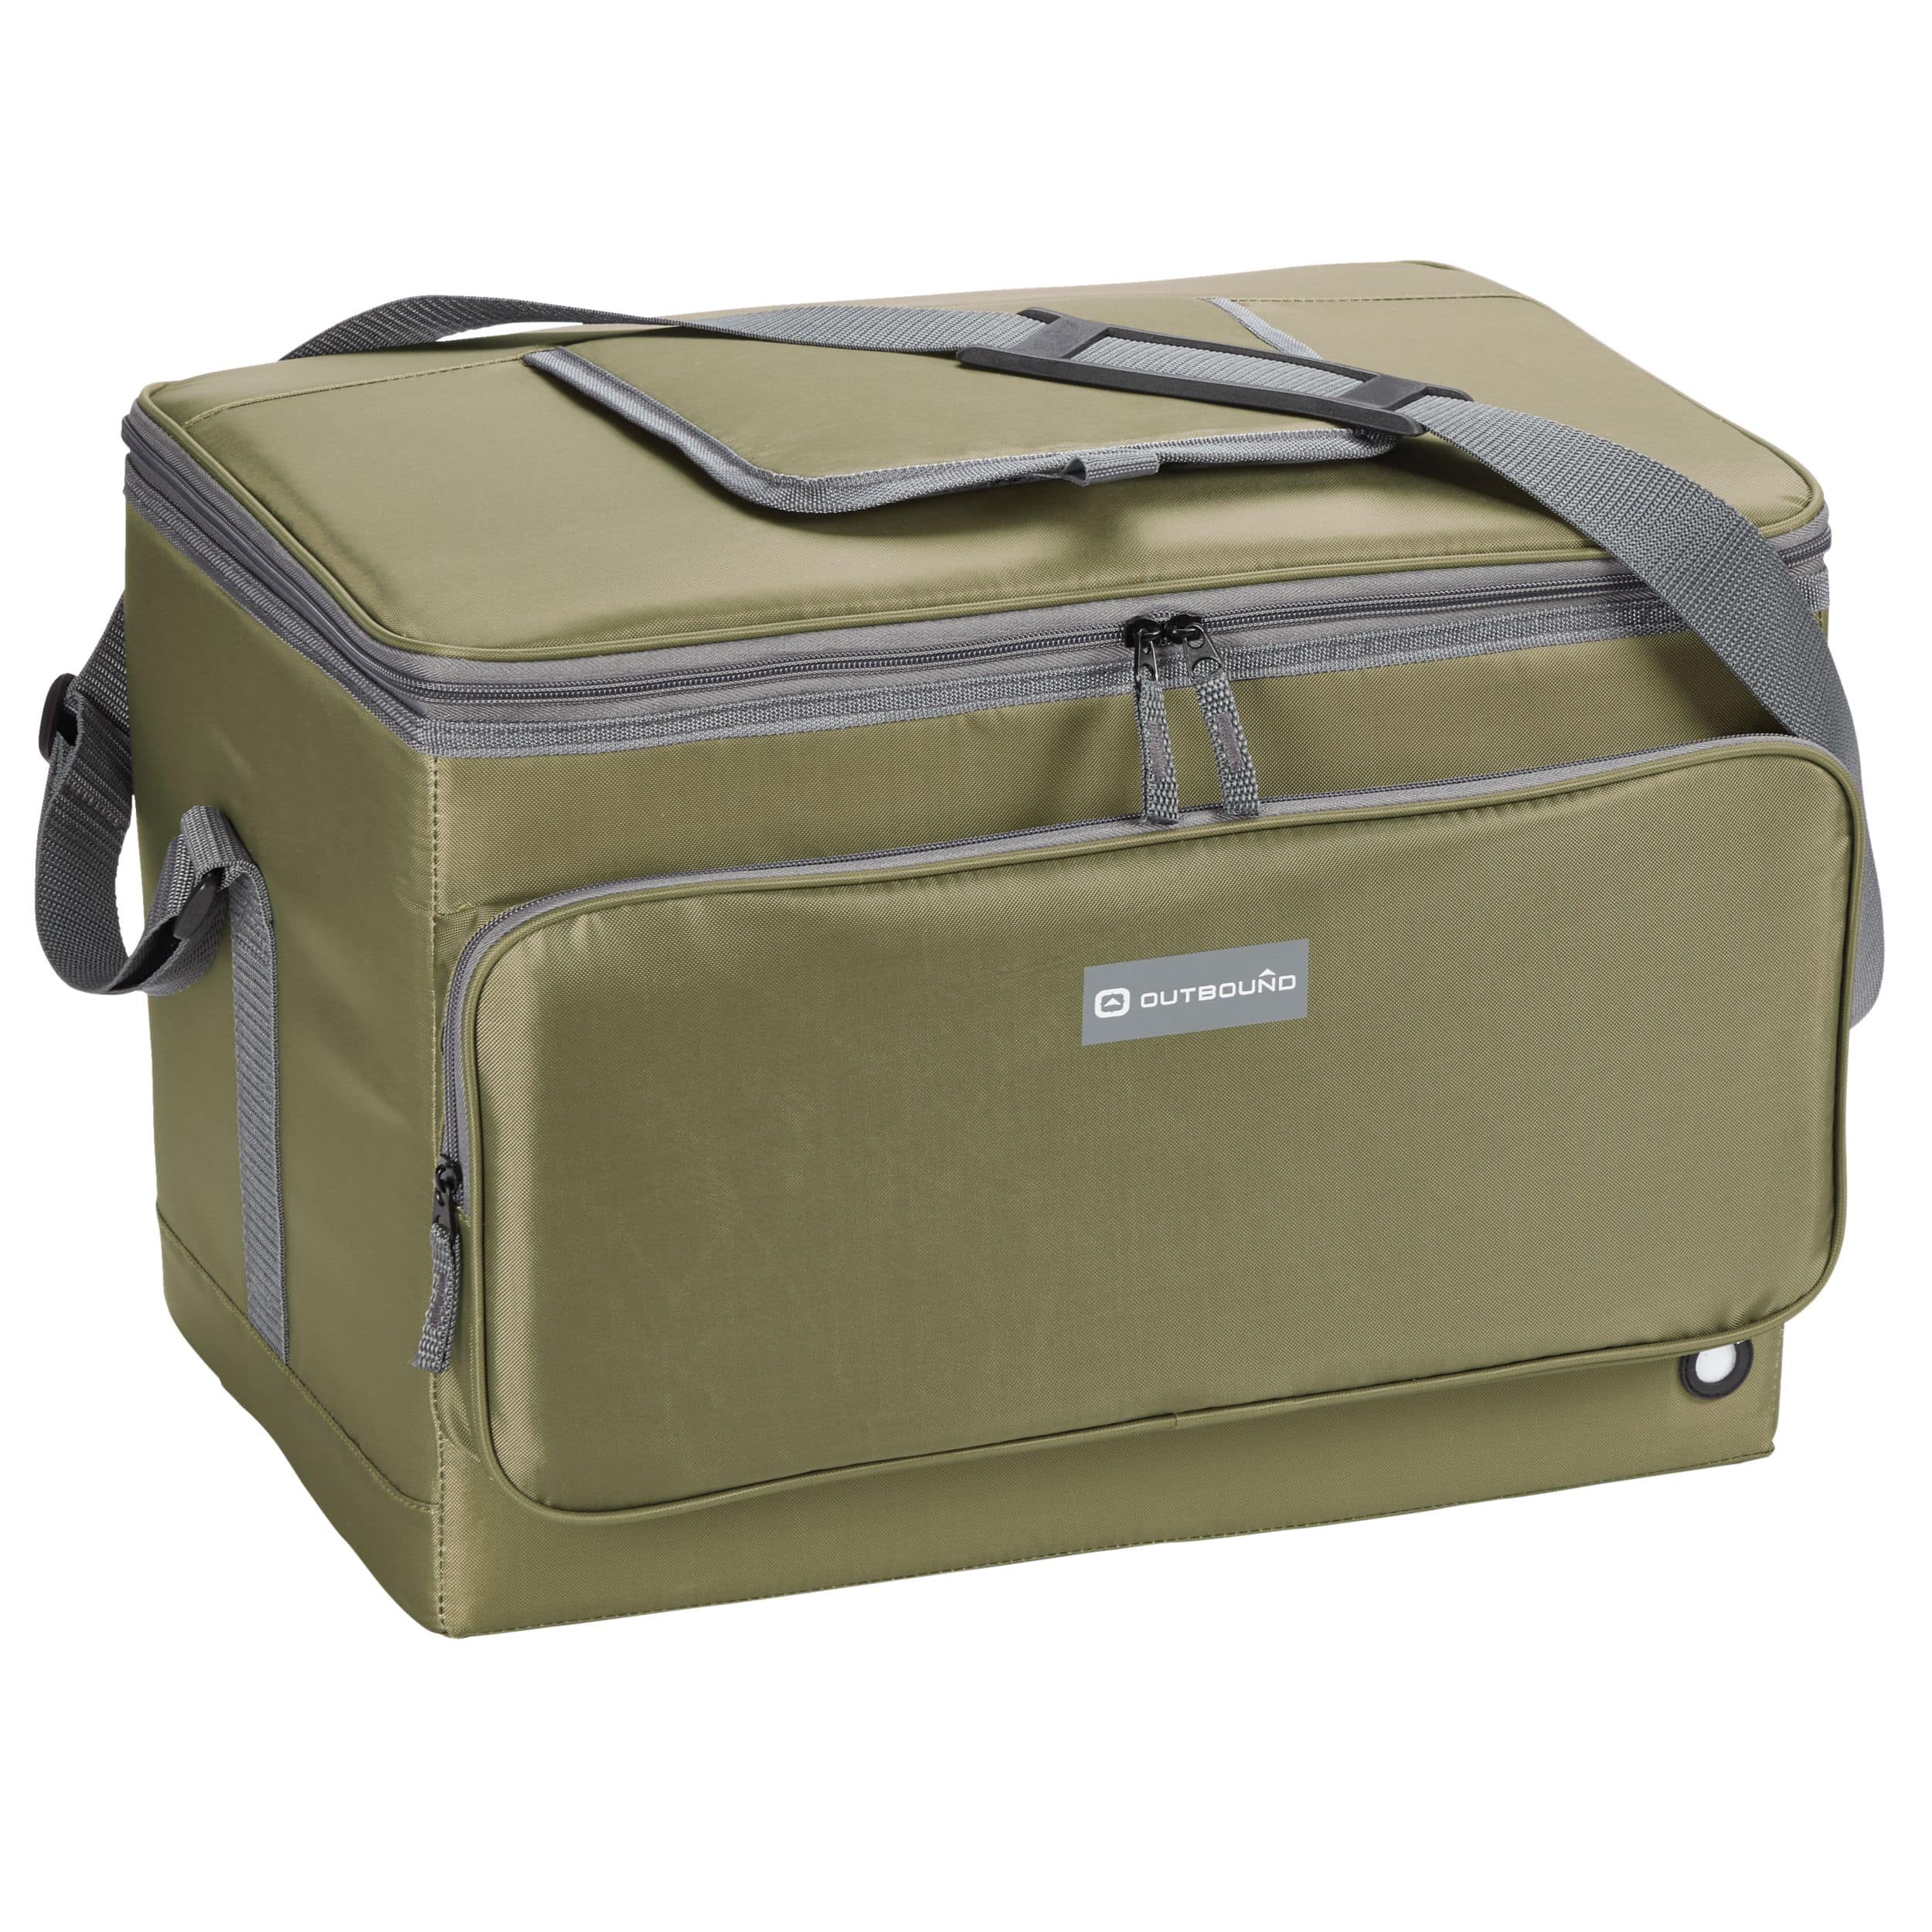 Outbound Large Collapsible Soft Cooler, 48 Can Capacity, 48-L